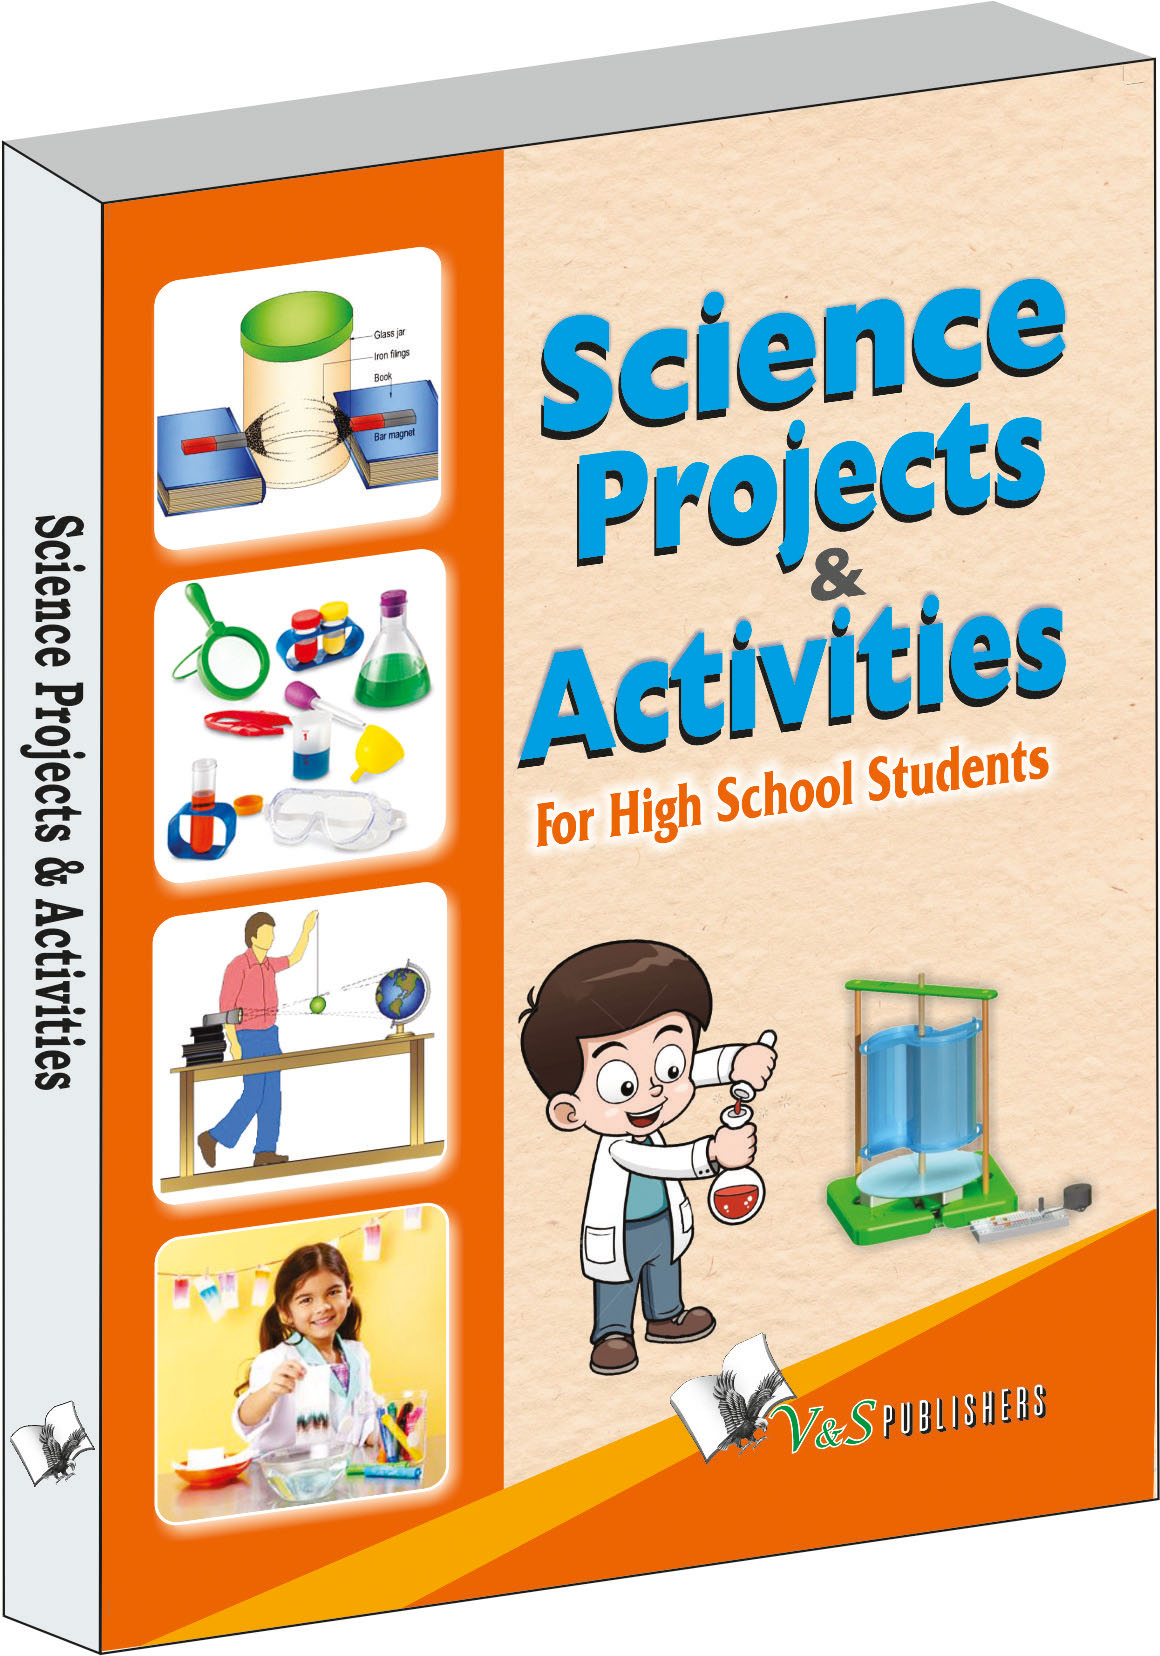 Science Projects & Activities -New and innovative projects for high school students